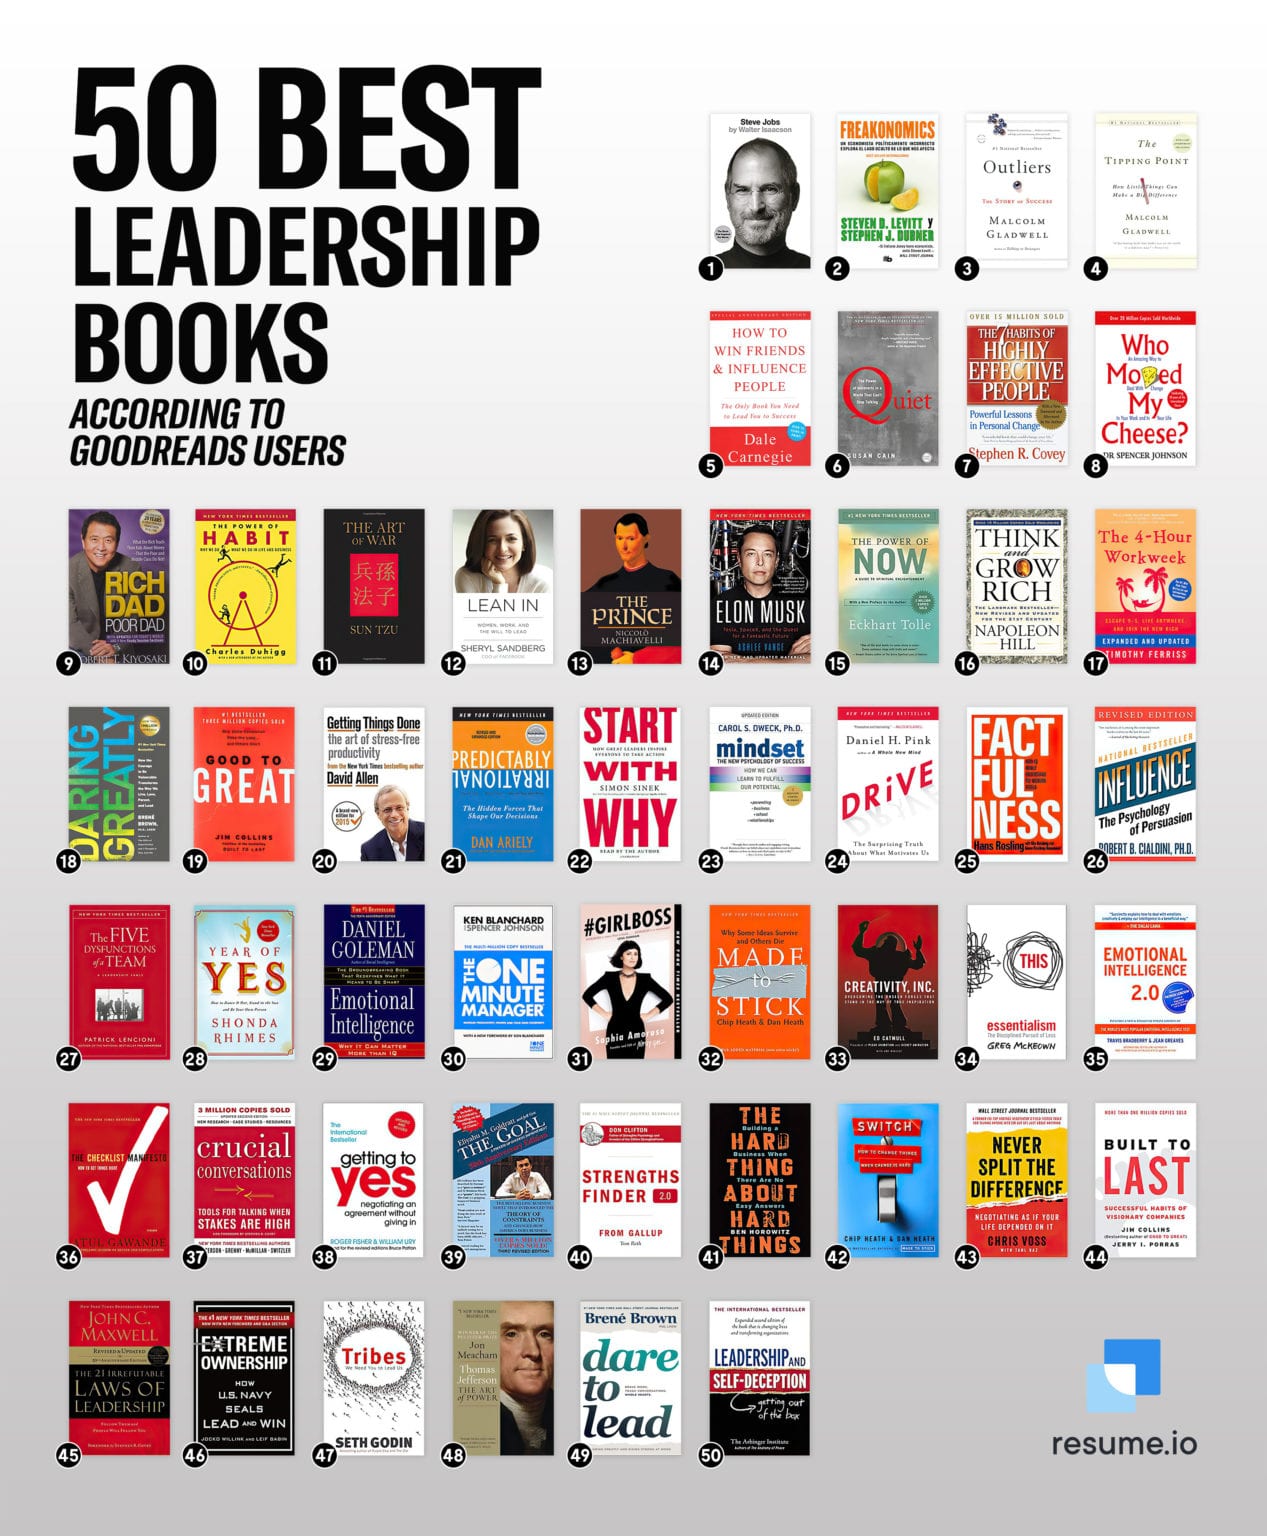 The Best Rated Leadership Books (According to Goodreads Data)